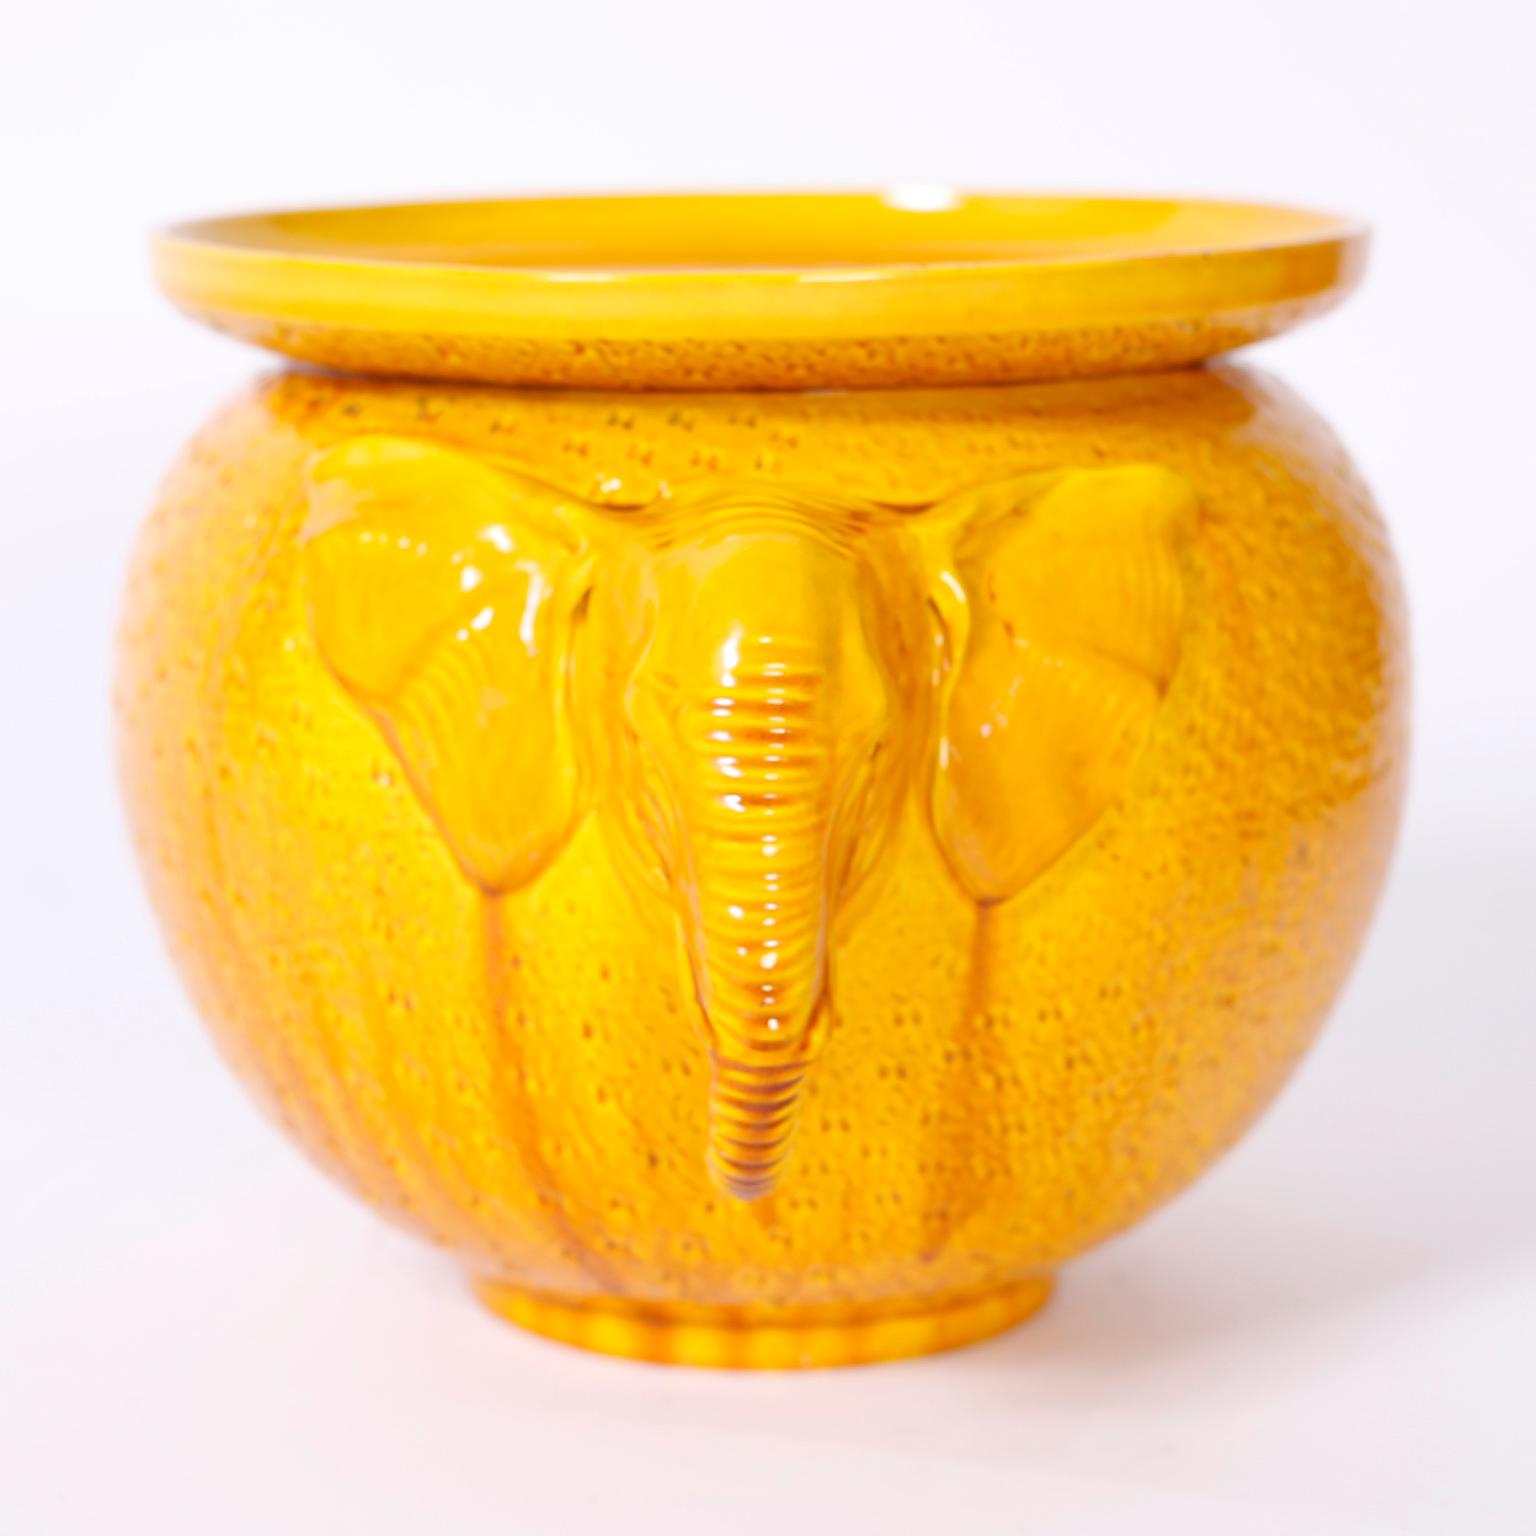 Striking Art Deco English porcelain jardiniere with an alluring yellow drip glaze over a Classic form with elephant head handles.